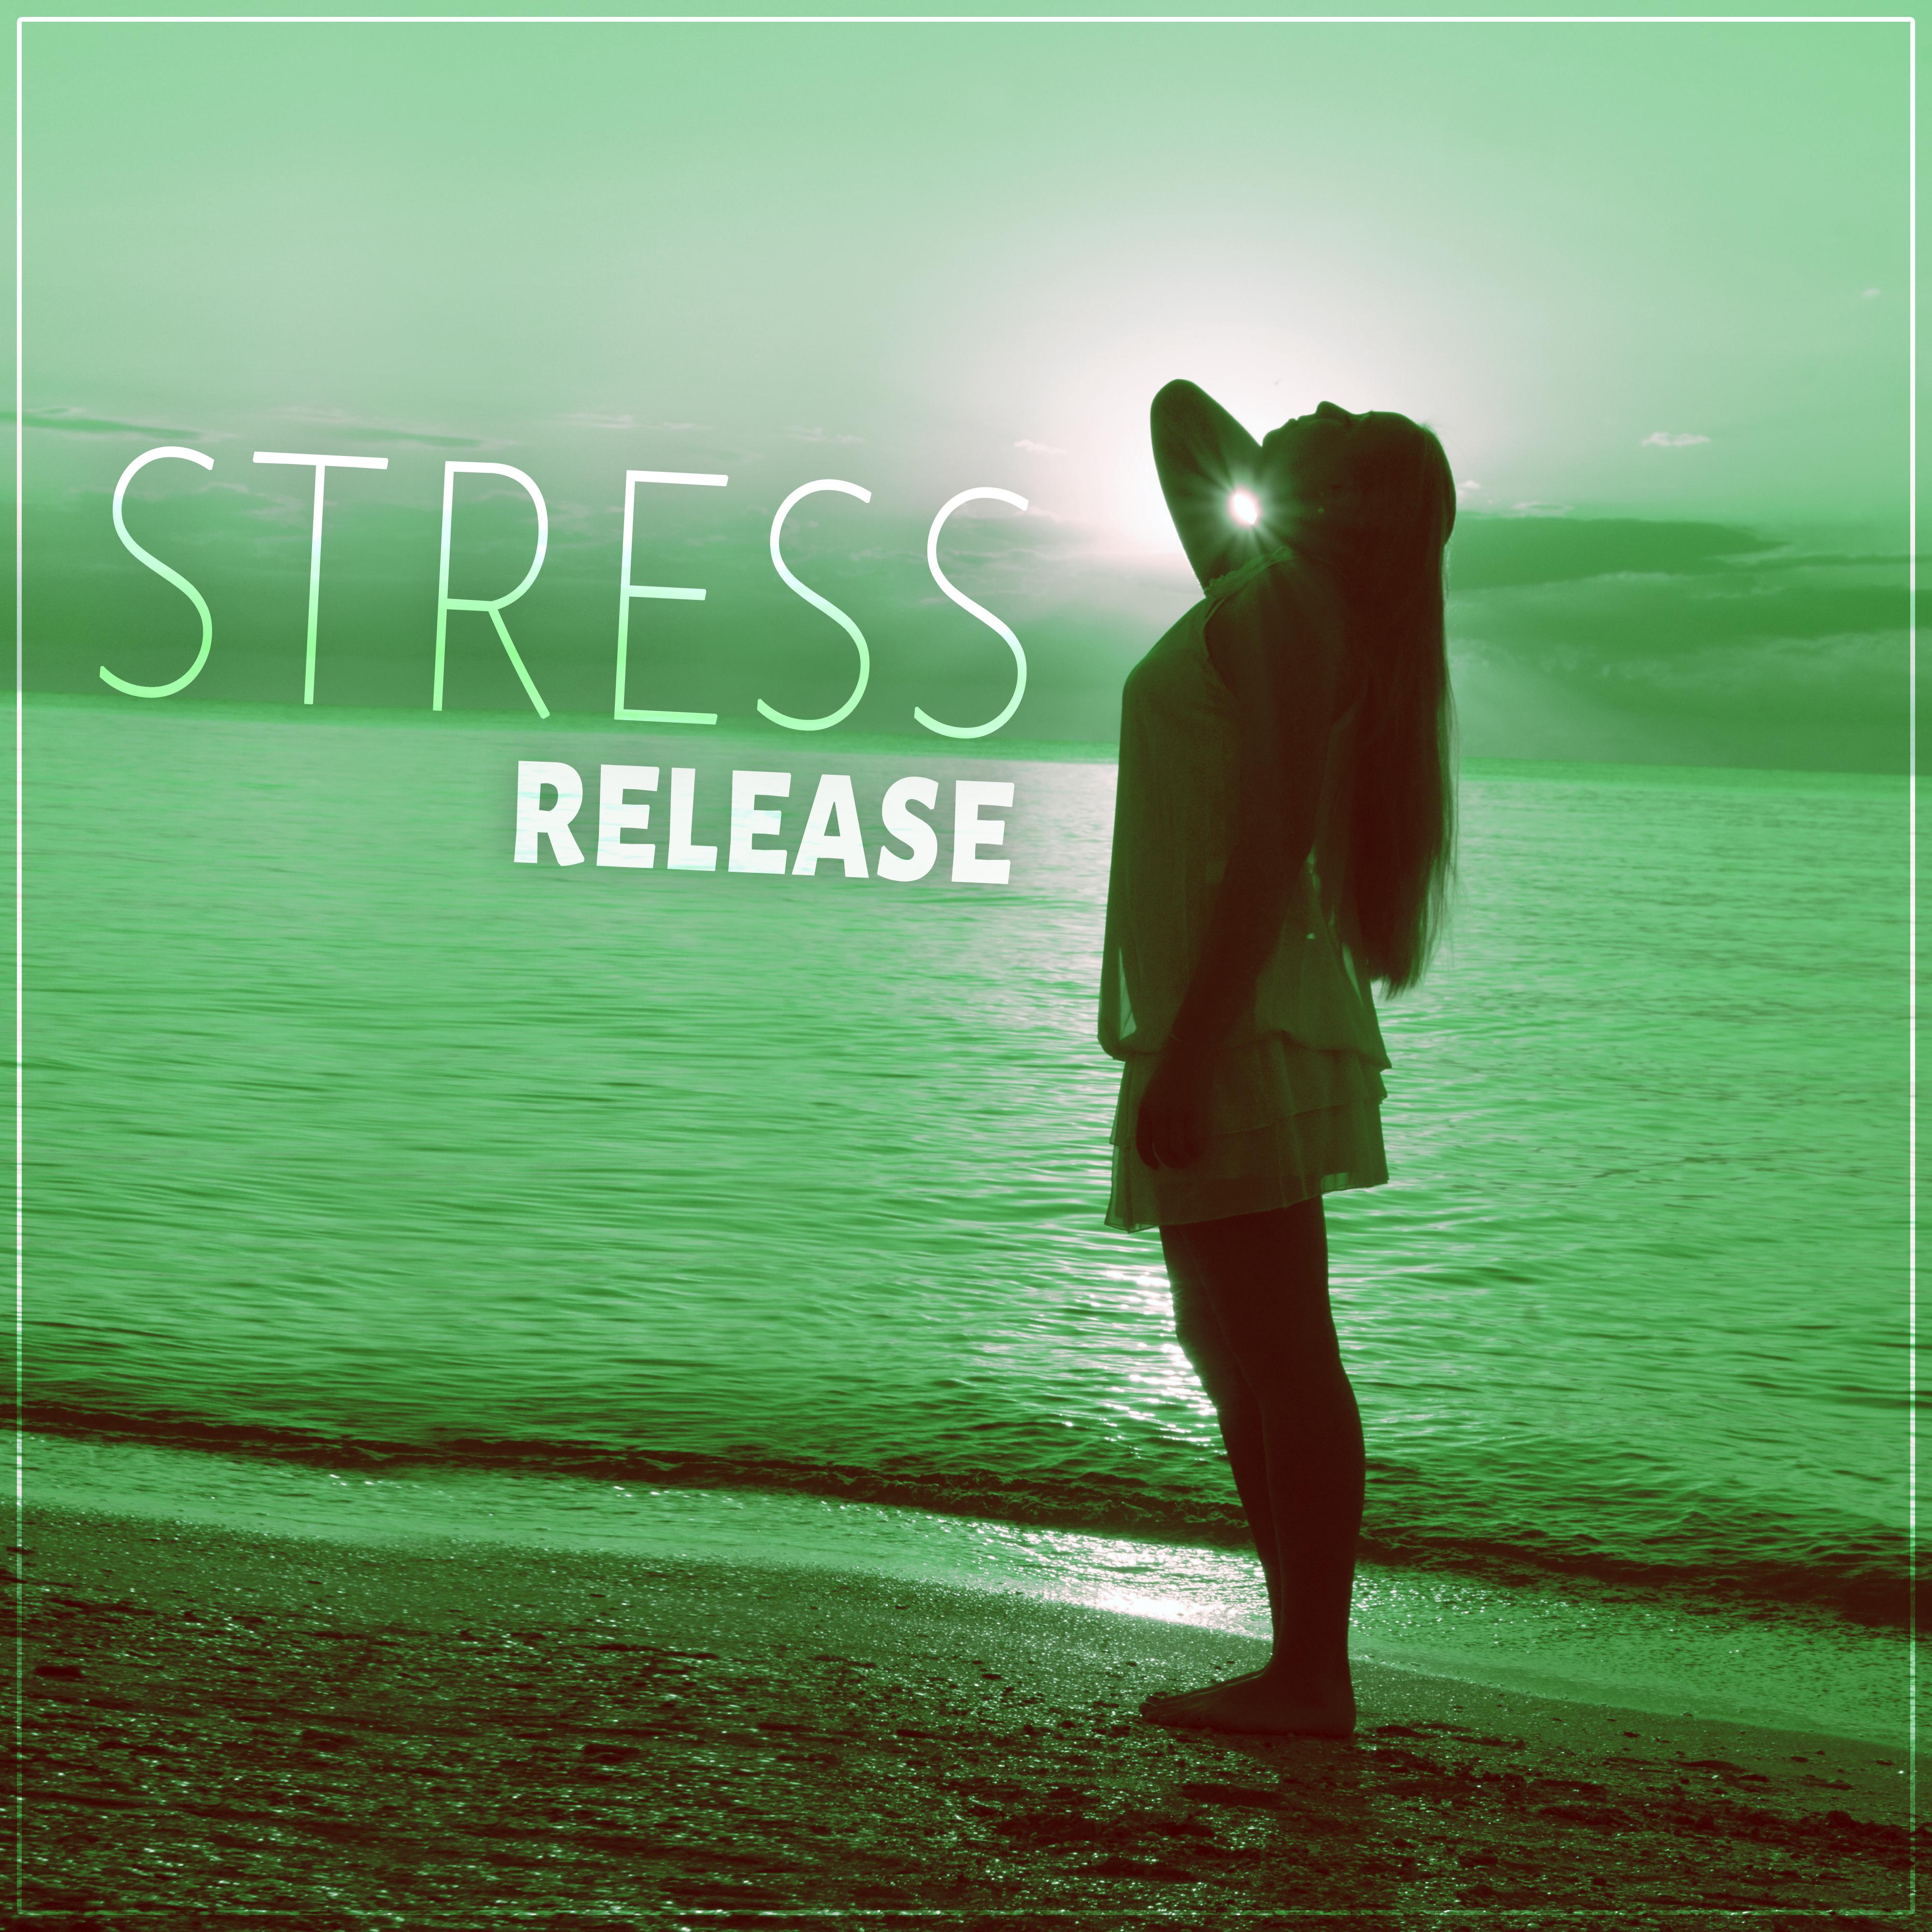 Stress Release - Tranquility Spa, Calm, Magnetic Moments with Nature Sounds, Health Care